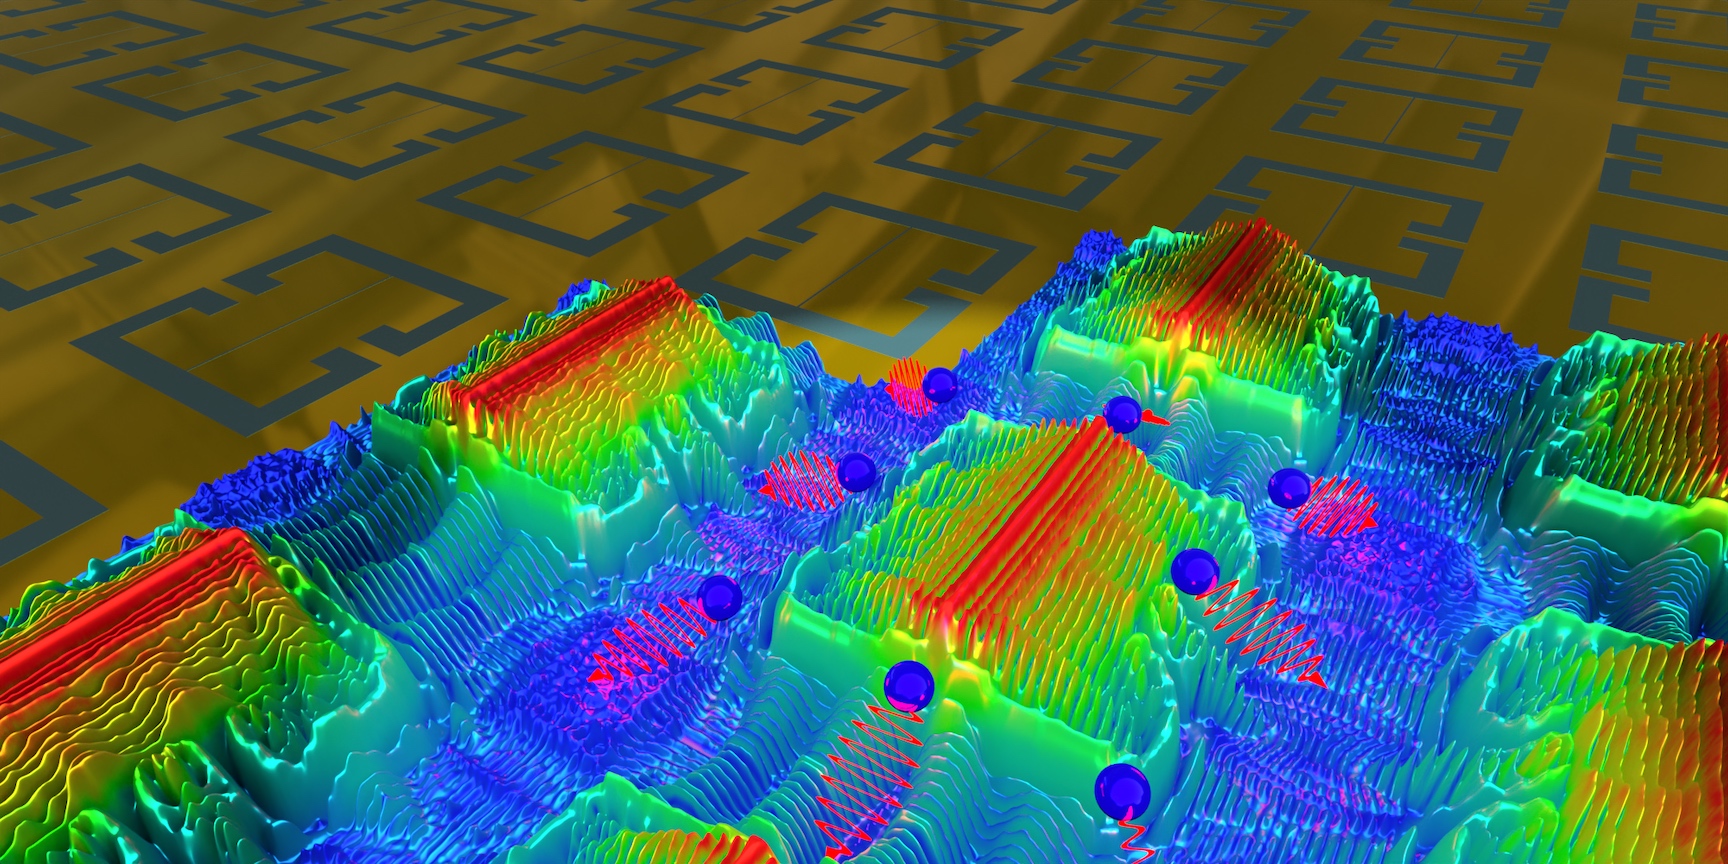 Enlarged view: Metasurface of split-ring resonators, partially overlaid with 3D colourmaps showing the simulated electric-field distribution